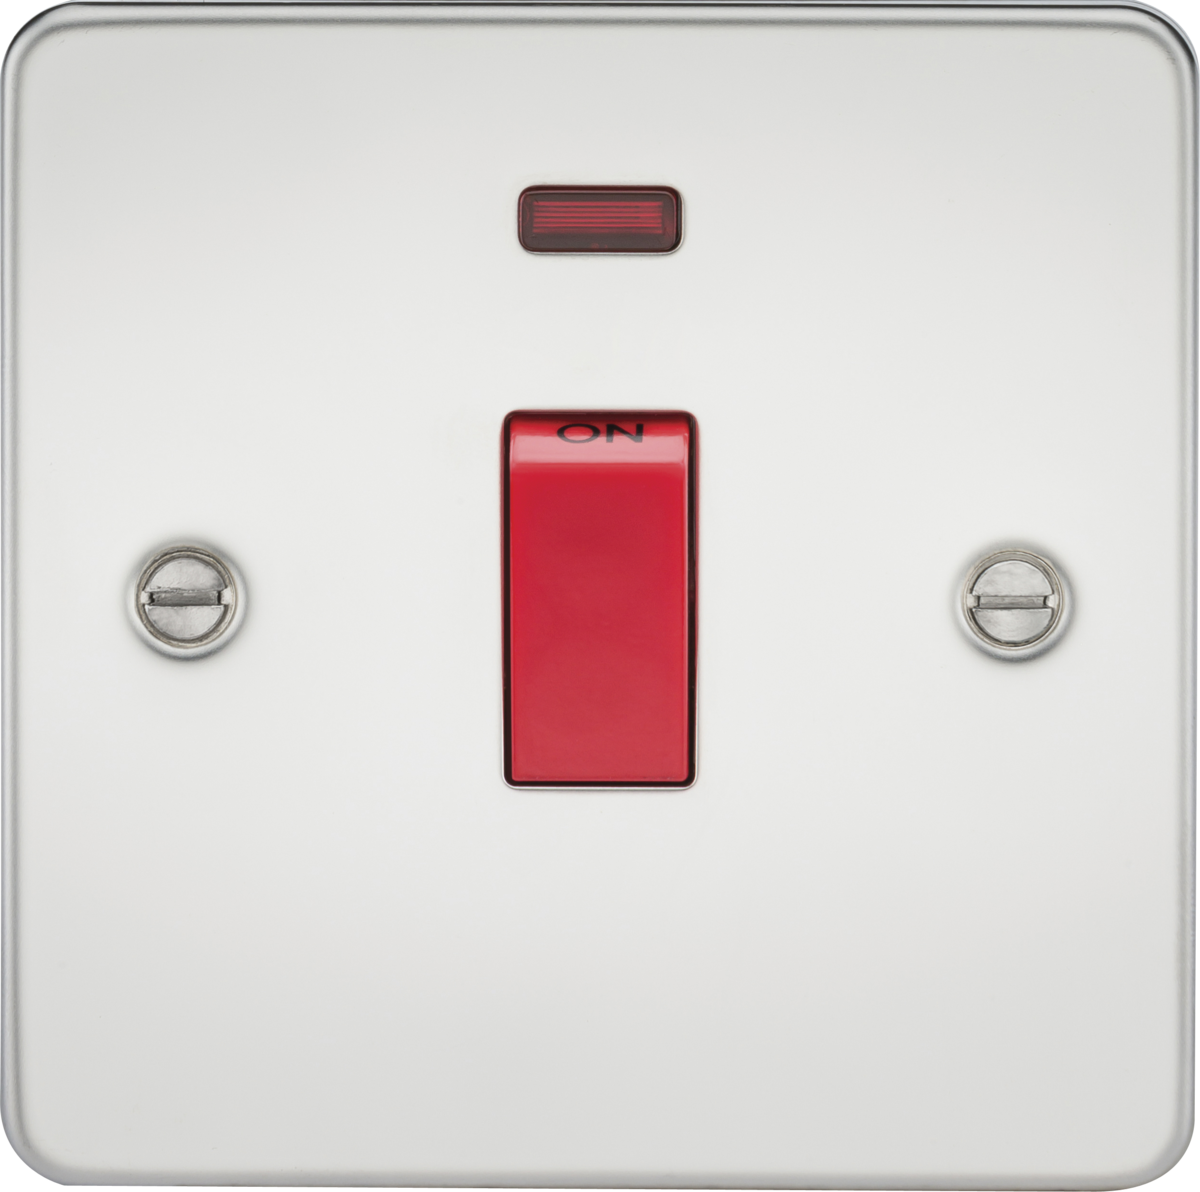 Flat Plate 45A 1G DP switch with neon - polished chrome